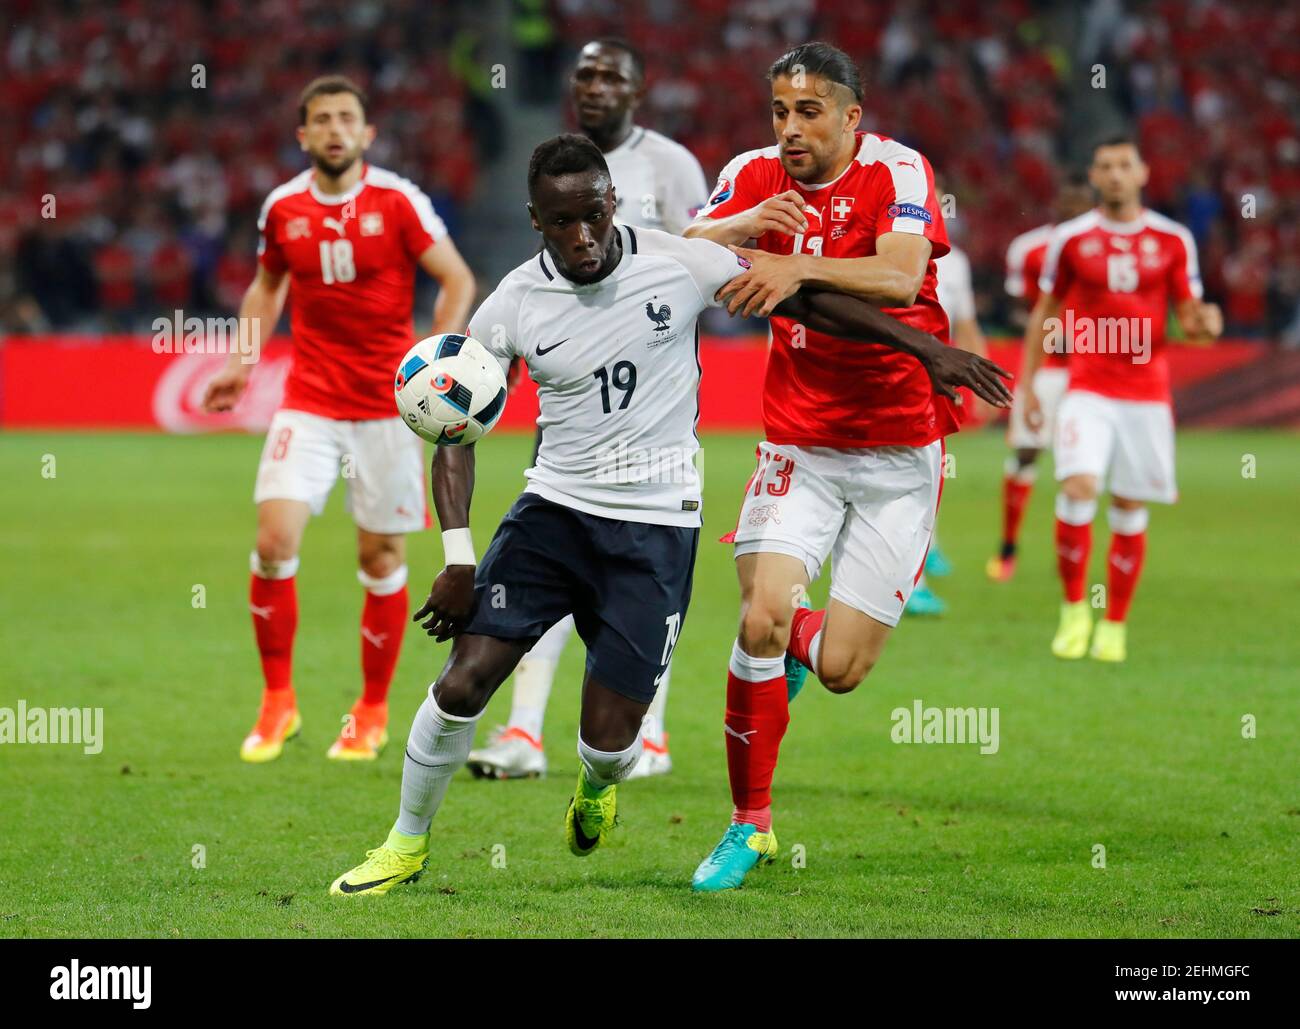 Football Soccer Switzerland V France Euro 16 Group A Stade Pierre Mauroy Lille France 19 6 16 France S Bacary Sagna In Action With Switzerland S Ricardo Rodriguez Reuters Pascal Rossignol Livepic Stock Photo Alamy